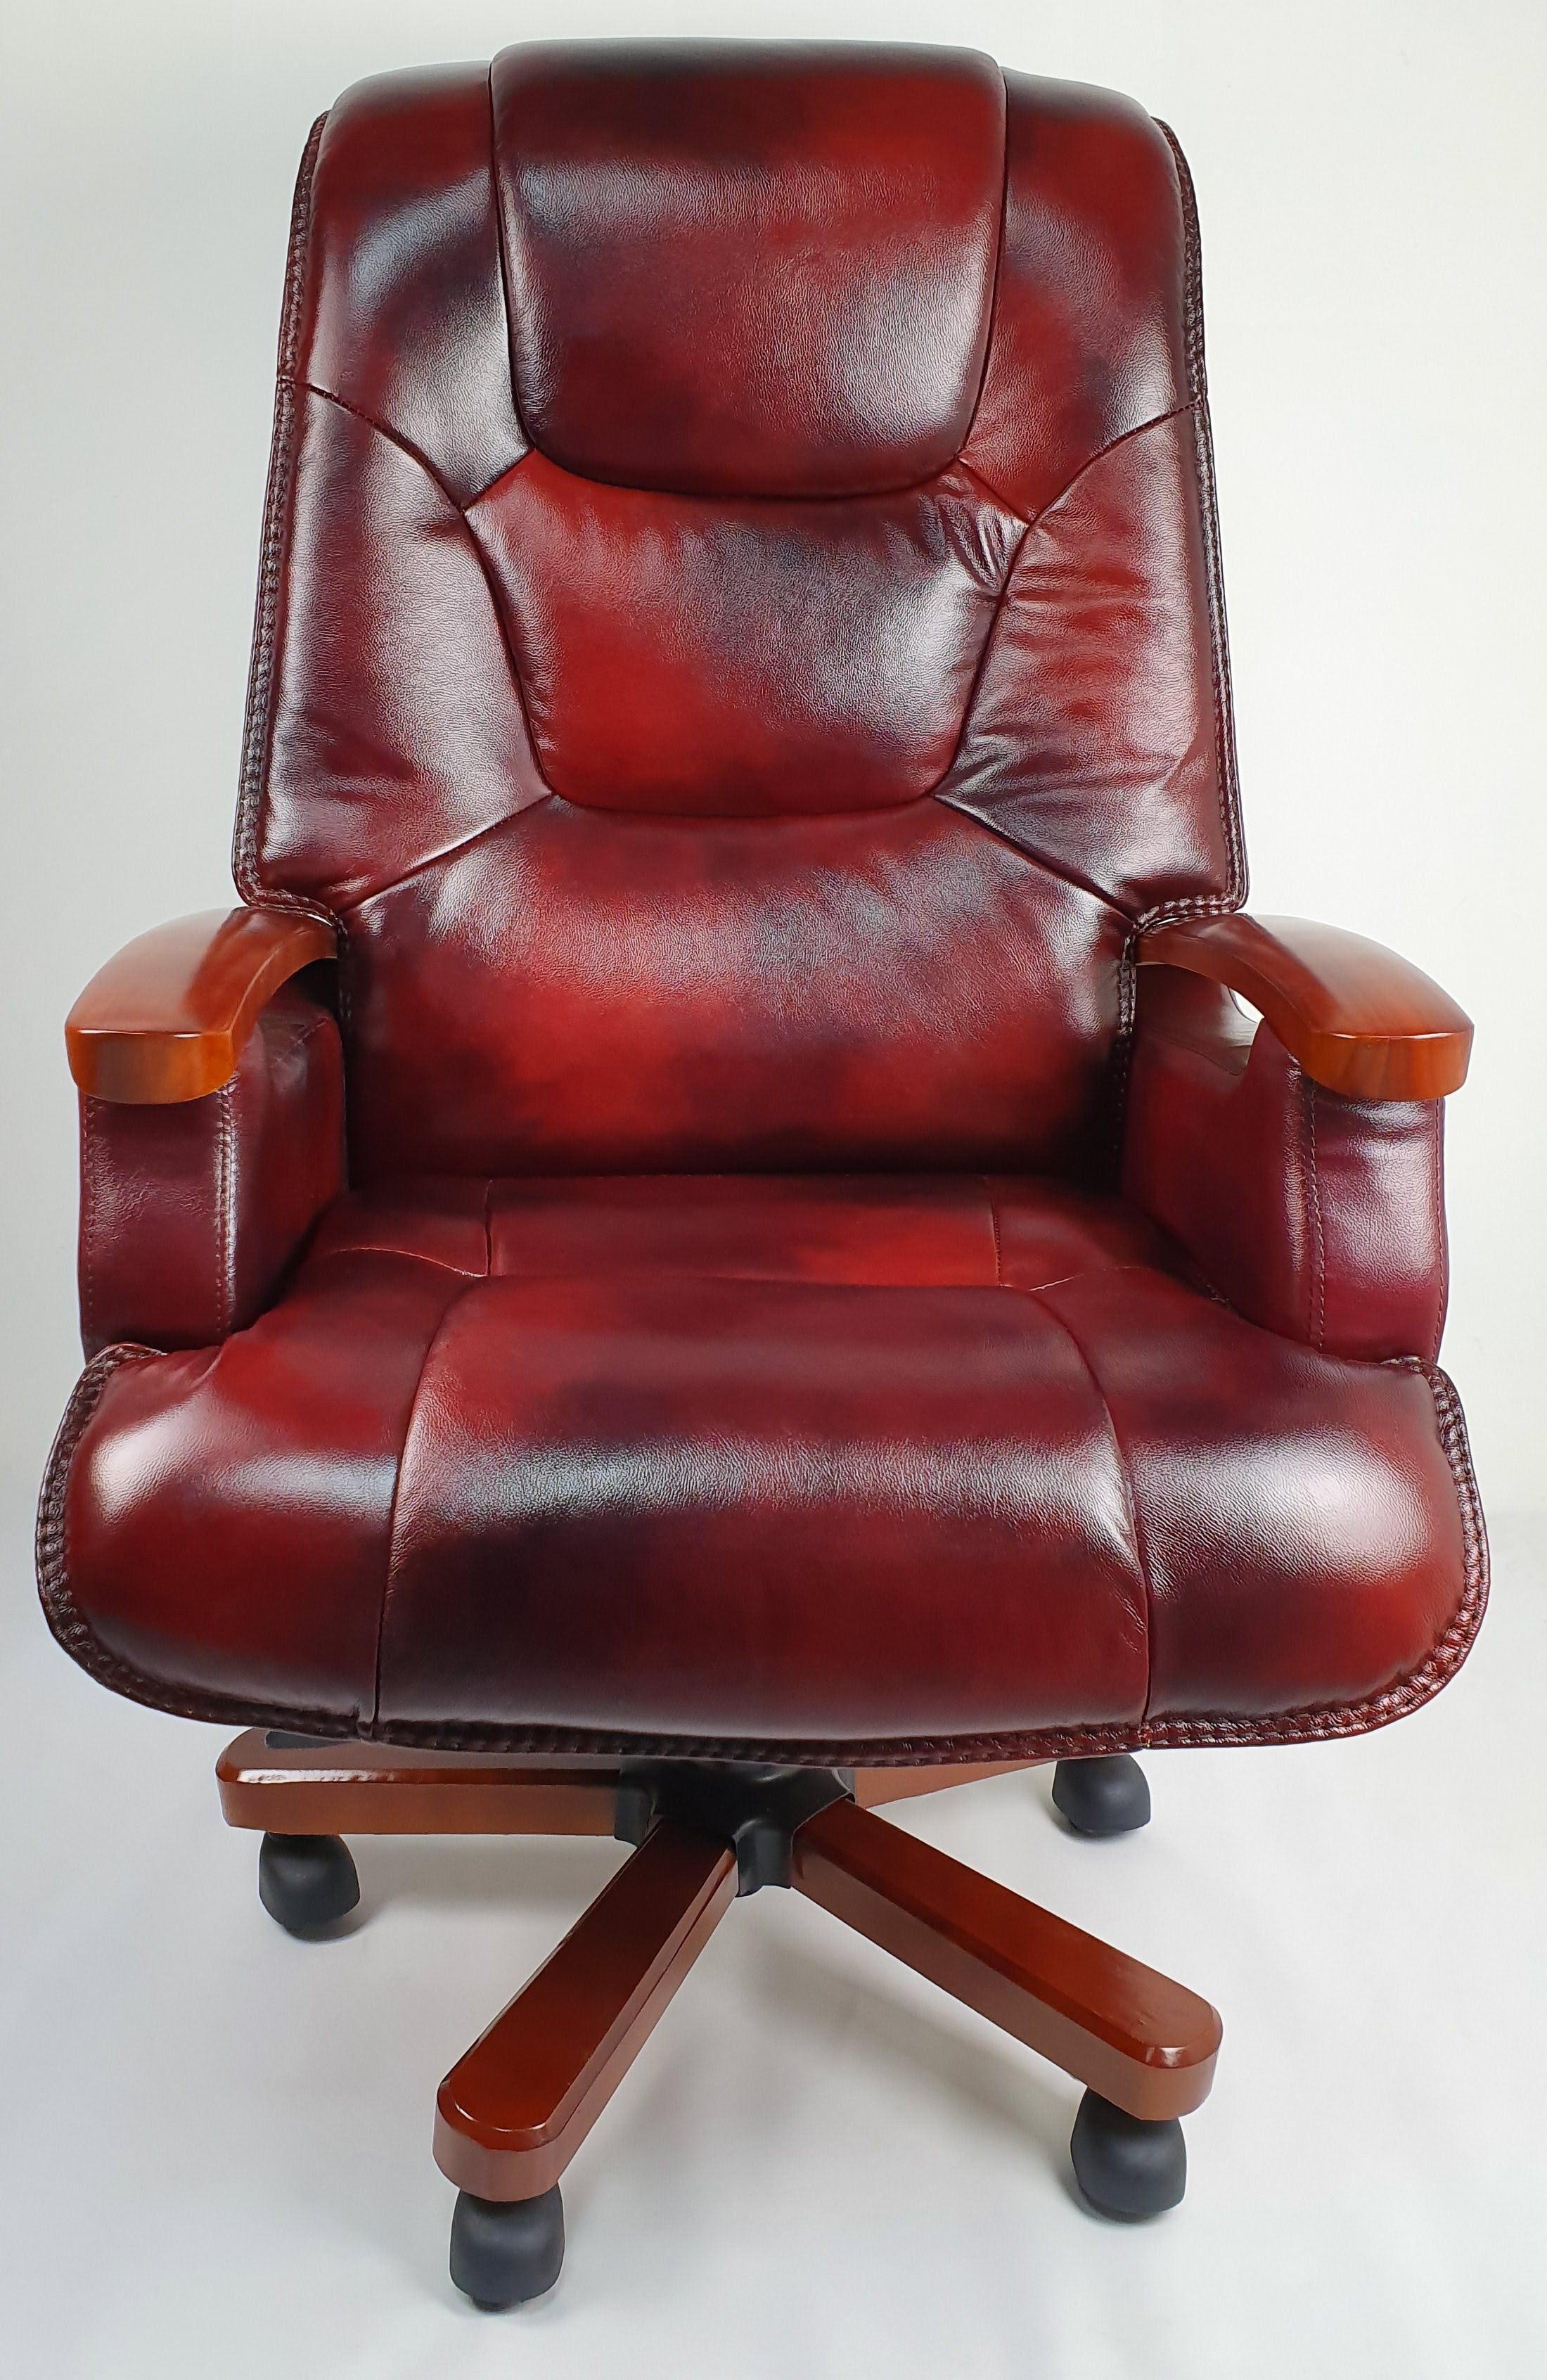 Luxury Burgundy Leather Executive Office Chair - A302